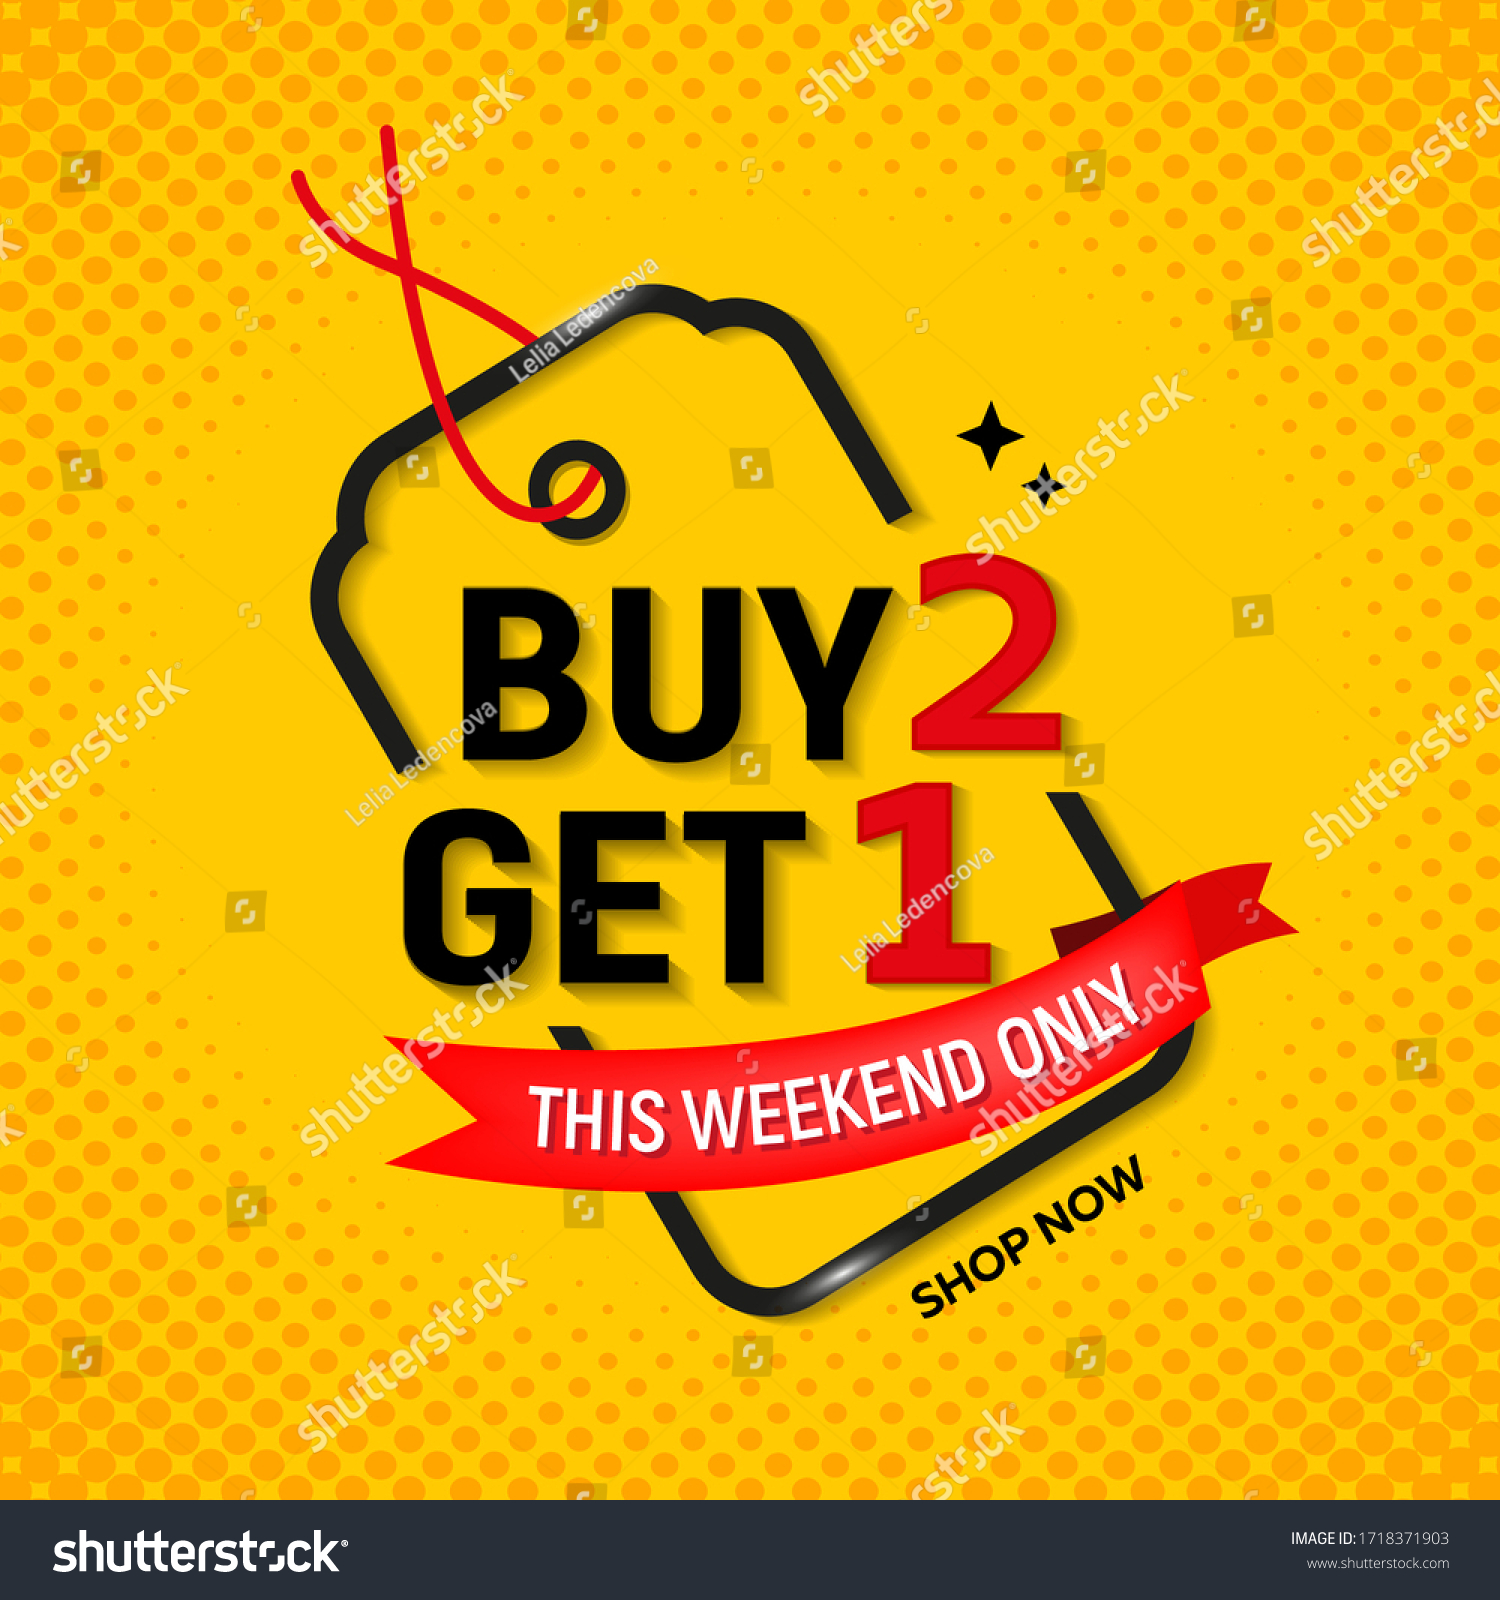 SVG of Sale banners buy 2, get 1 for free. Black label with text. Poster, flyer or sticker on a yellow background.
 svg